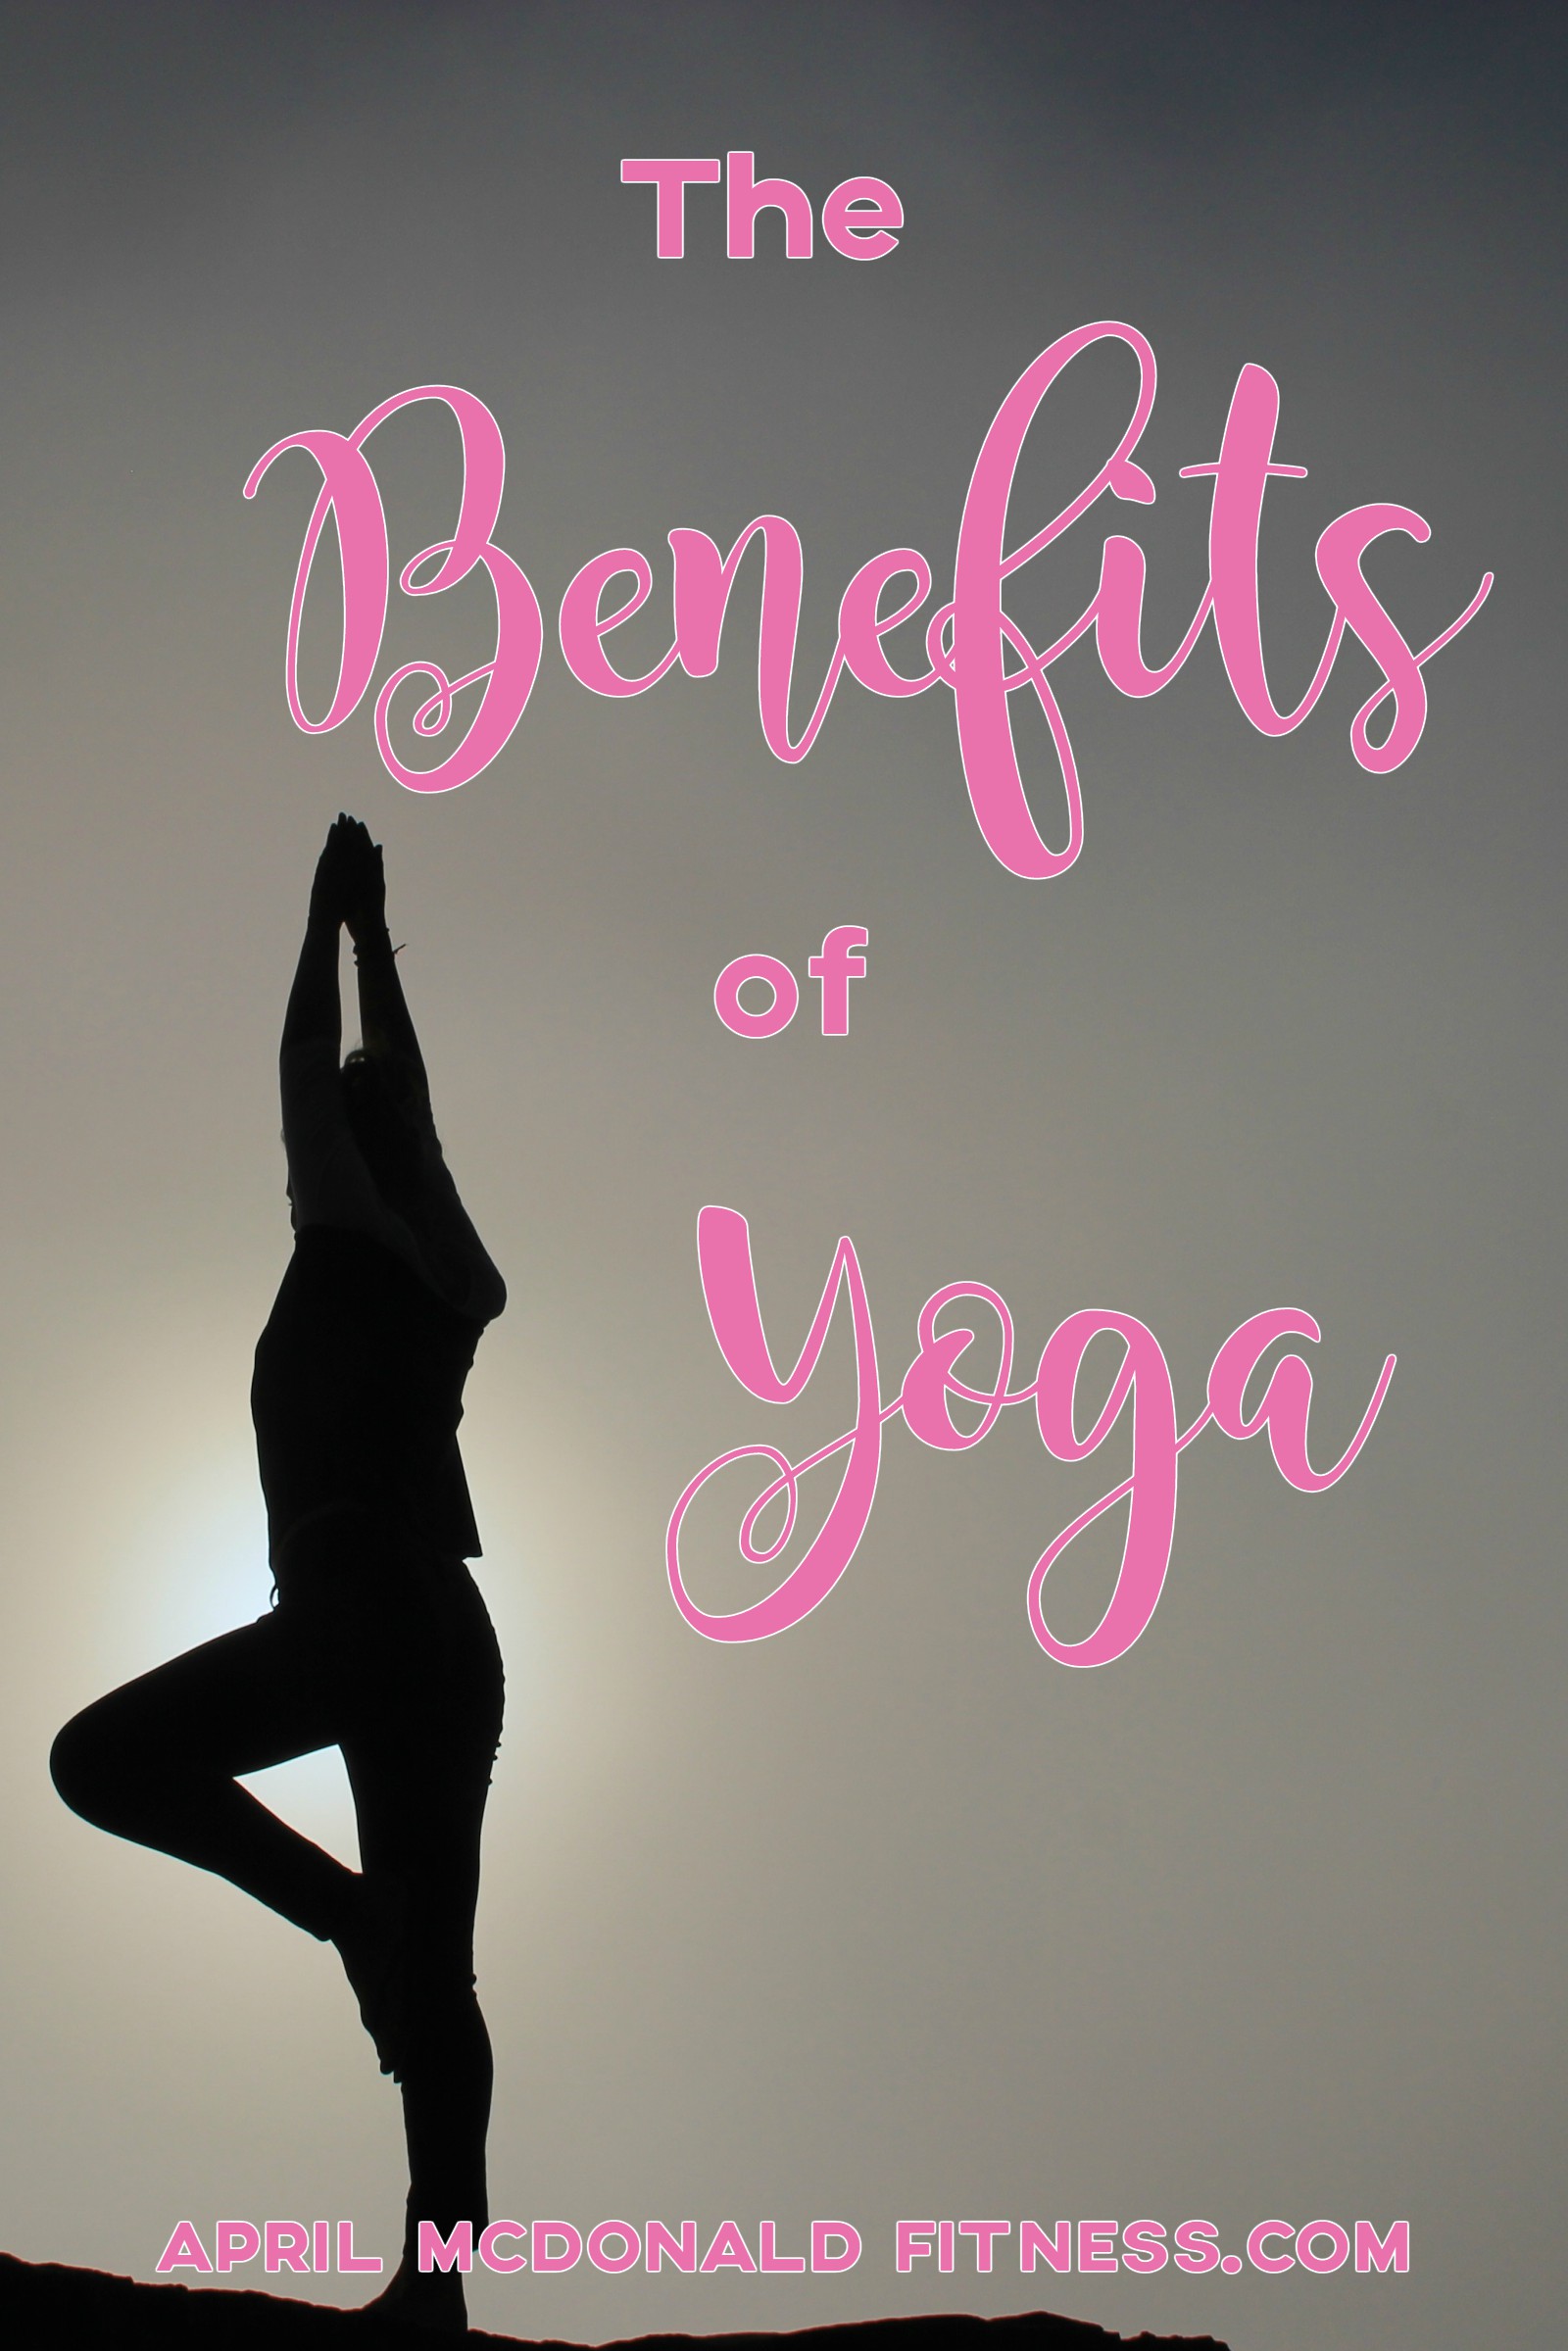 Yoga can be very beneficial...just as beneficial as any weight lifting or cardio program!